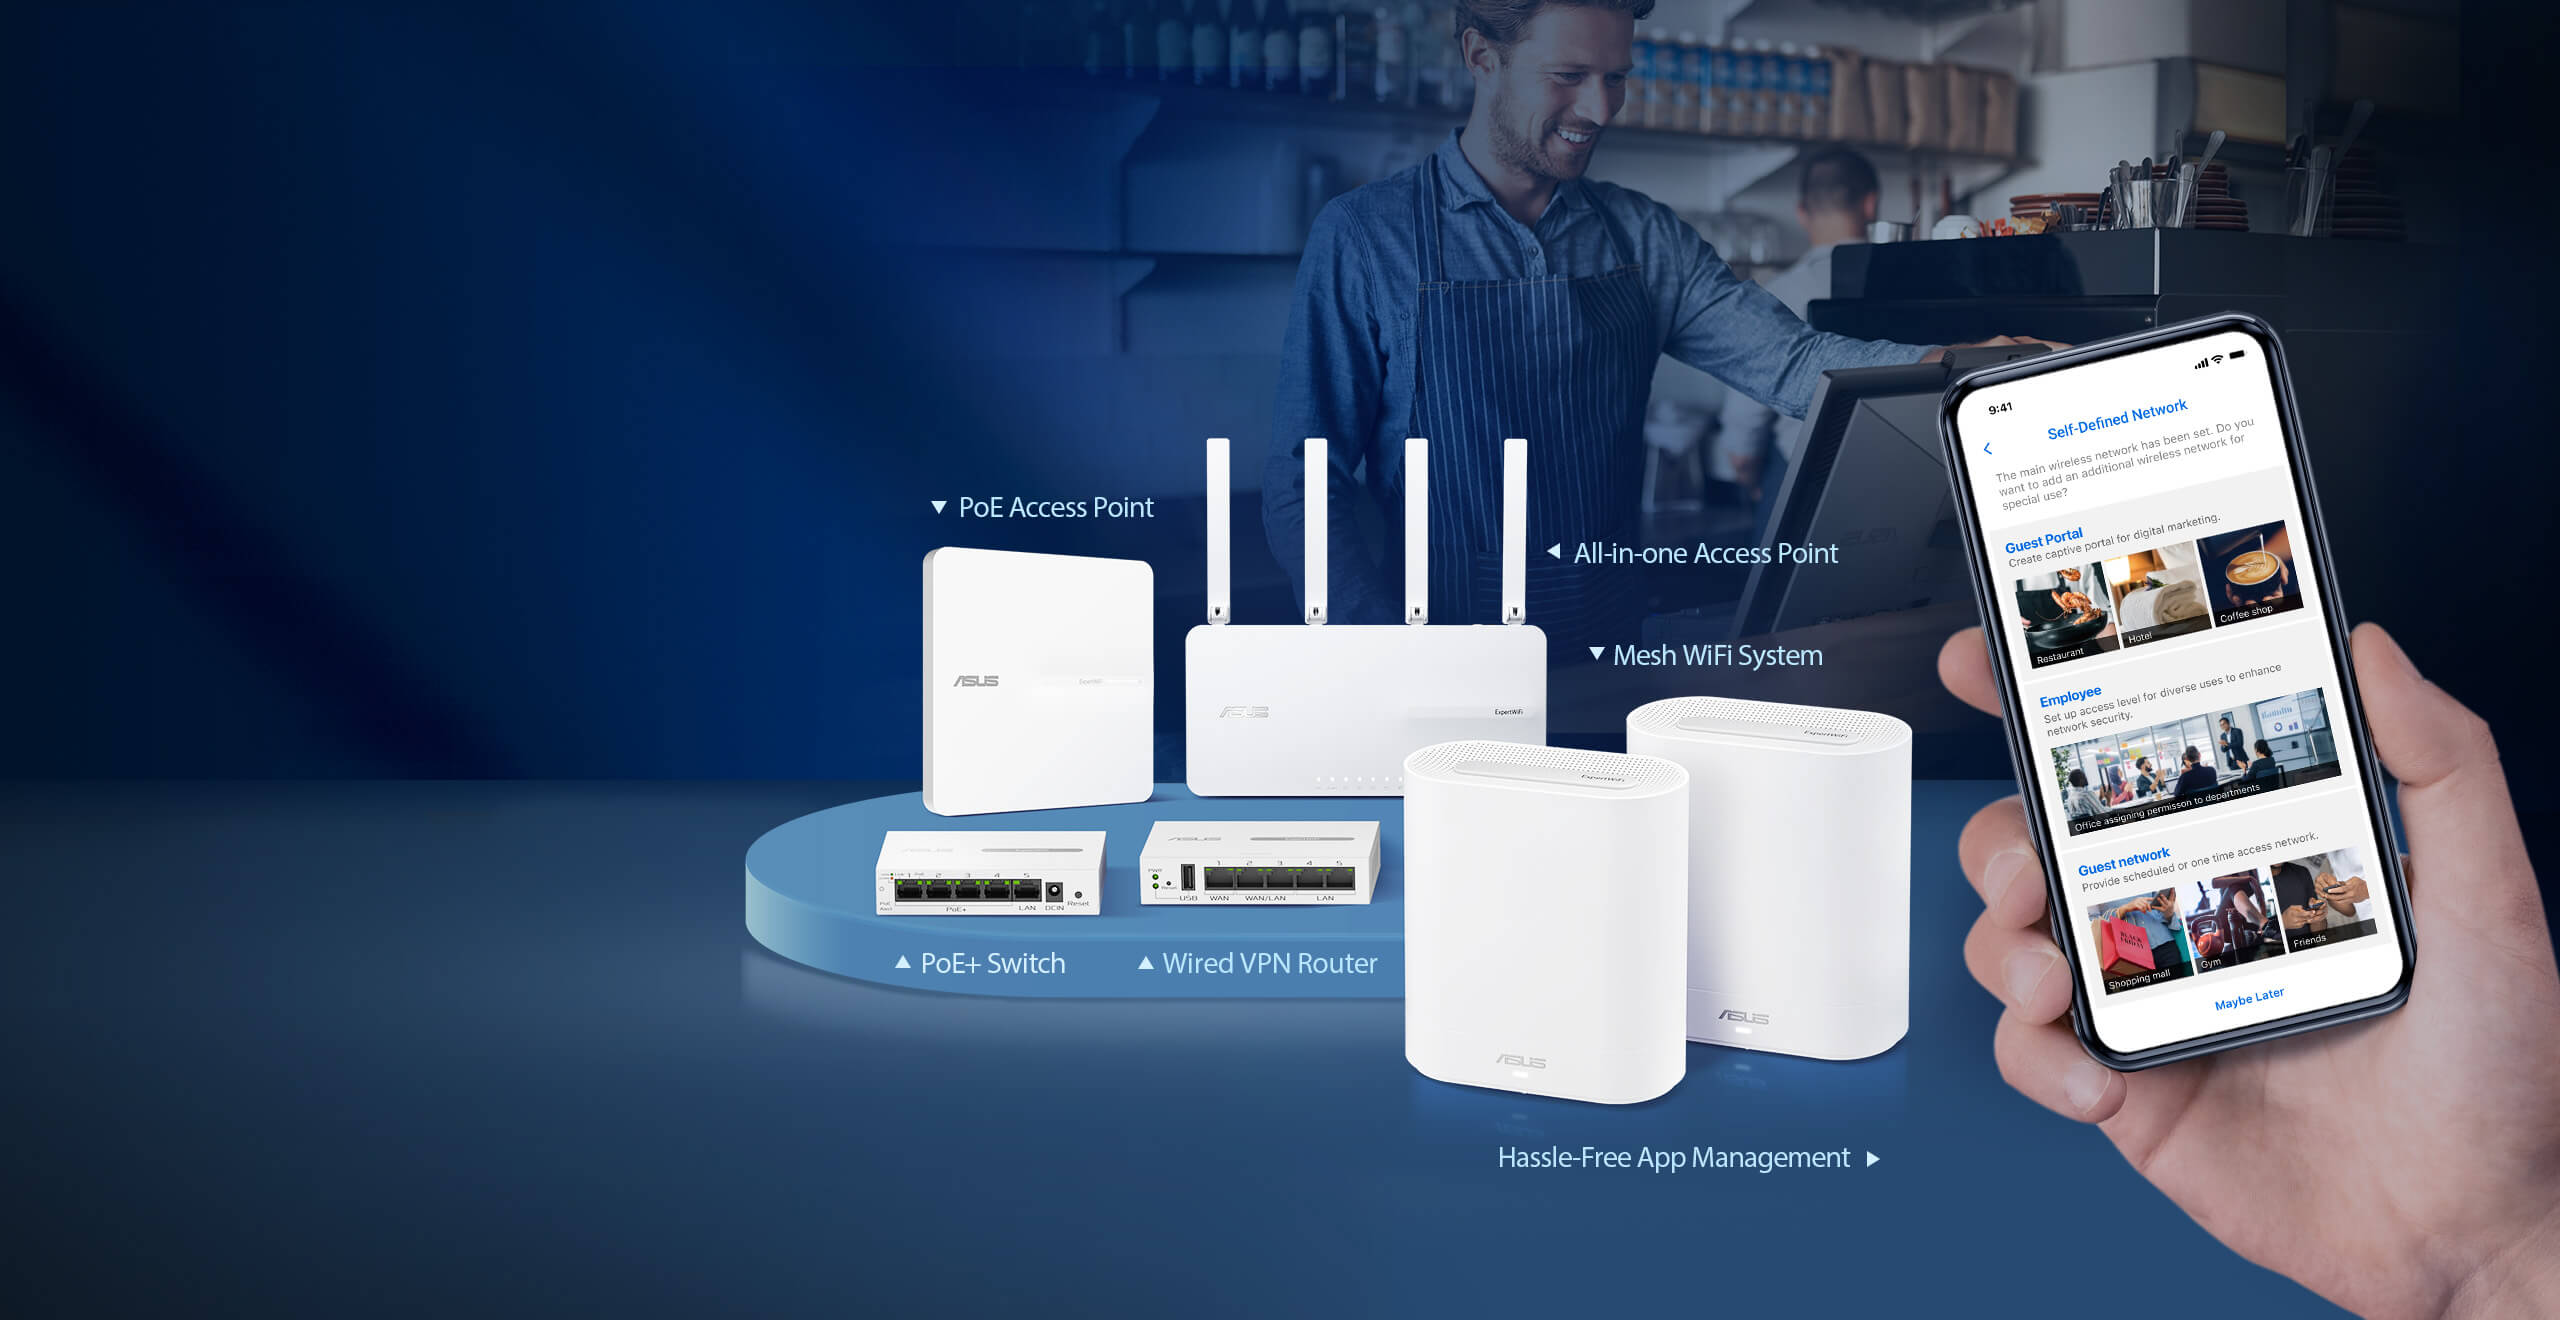 The ExpertWiFi product lineup in a café setting, with a hand holding a phone showing the ExpertWiFi SDN feature UI. From left to right in the back: EBG15 PoE AP, EBR63 all-in-one AP. Front: EBP15 PoE+ switch, EBG15 wired VPN router, and two packs of EBM68 mesh system.